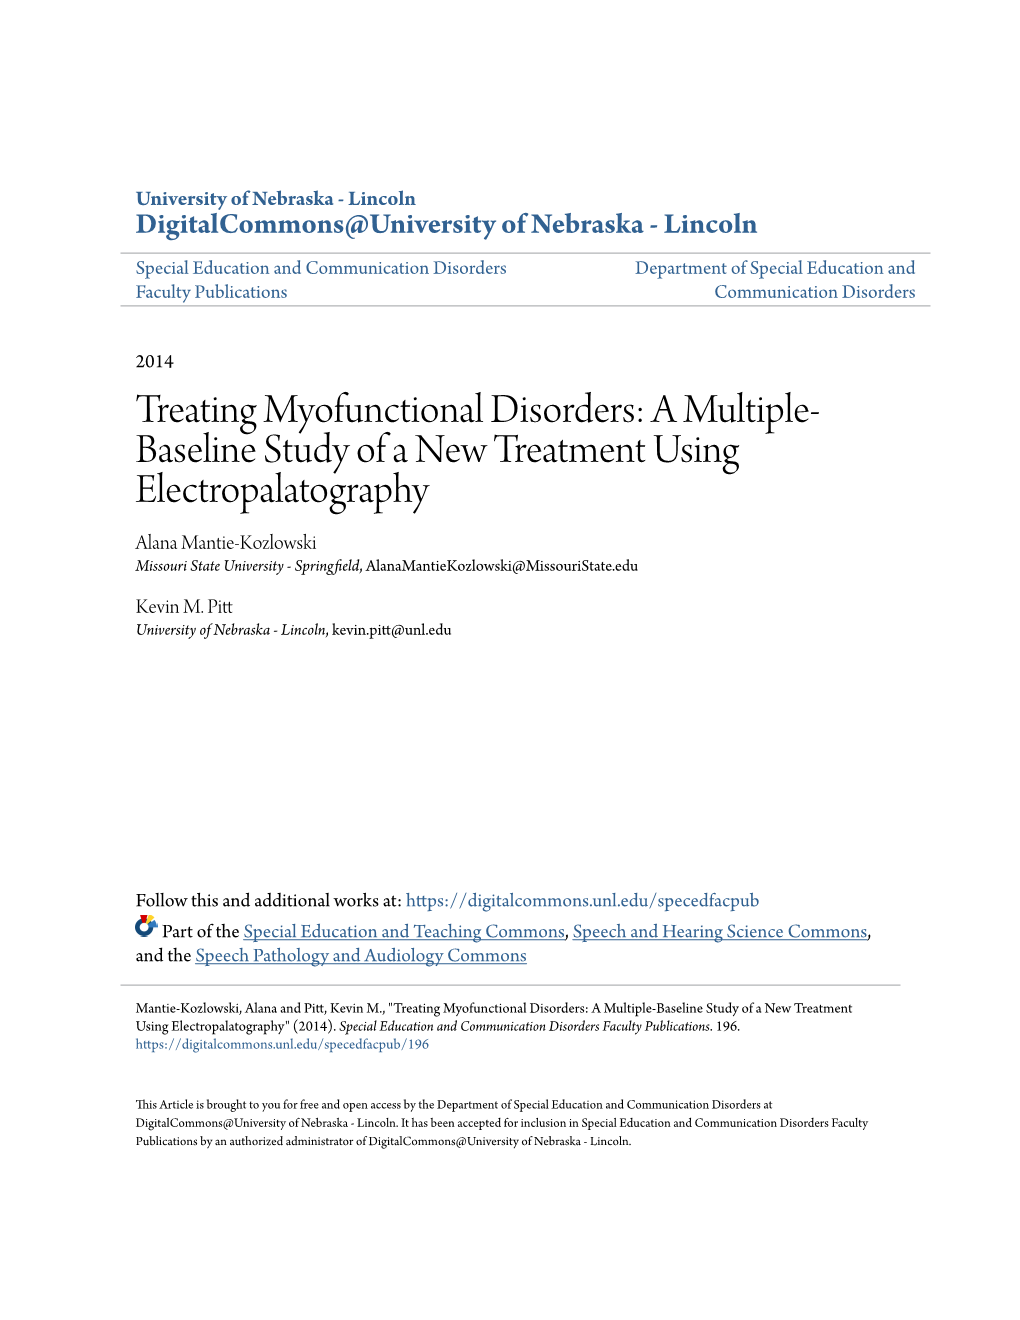 Treating Myofunctional Disorders: a Multiple-Baseline Study of a New Treatment Using Electropalatography" (2014)